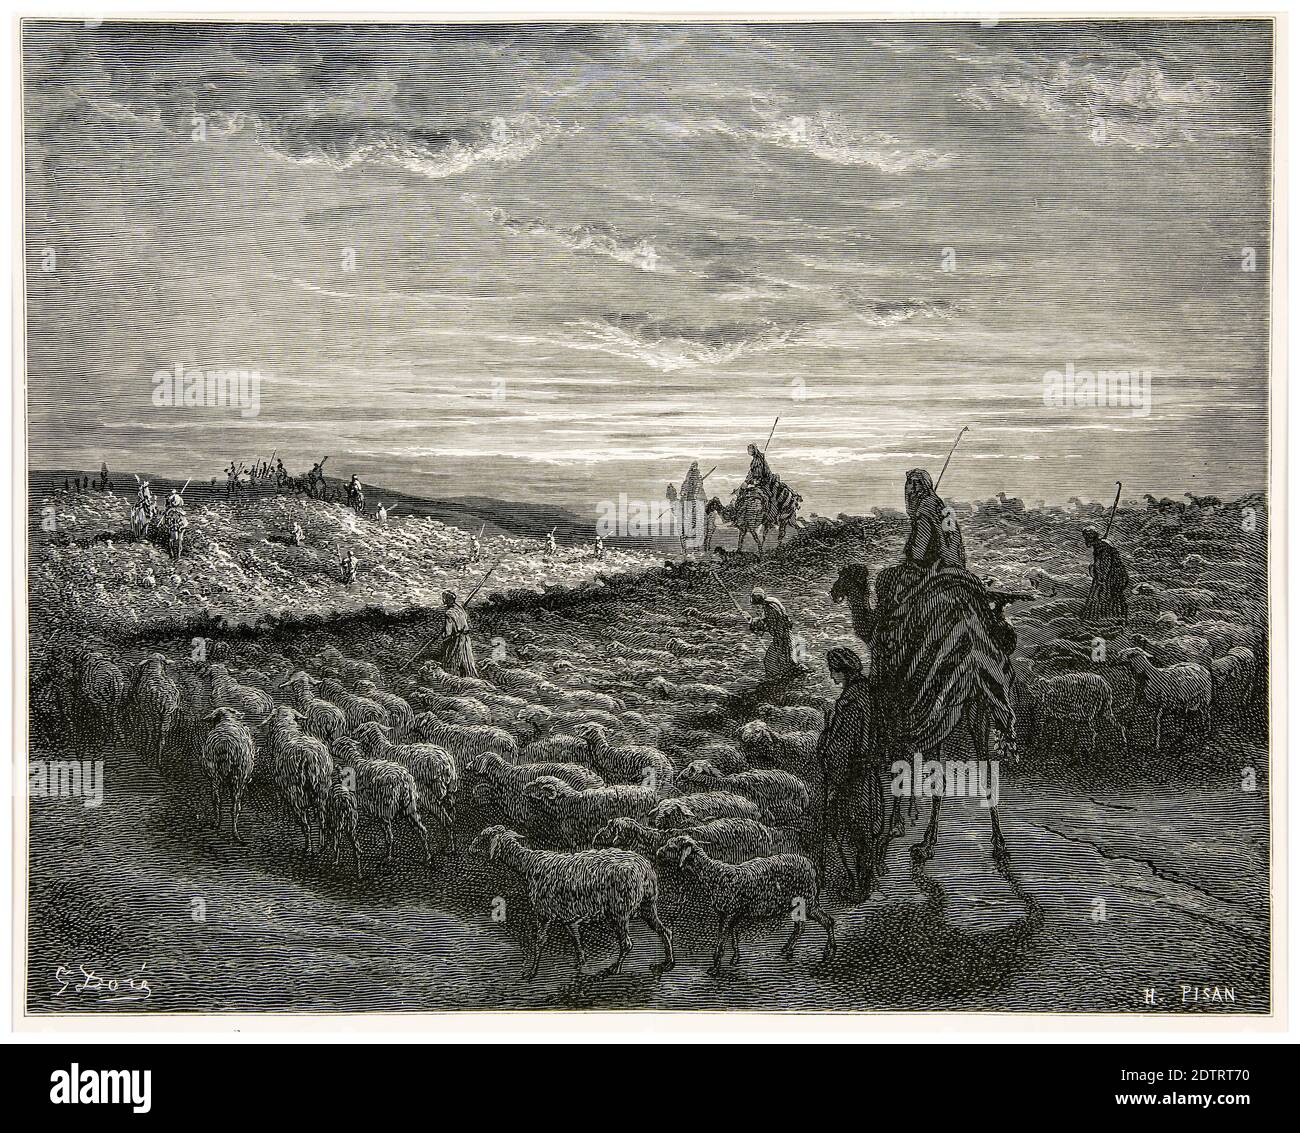 Gustave Doré und Hélidore-Joseph Pisan, Holzschnitt, Abraham goes to the Land of Canaan, 1866 Stockfoto